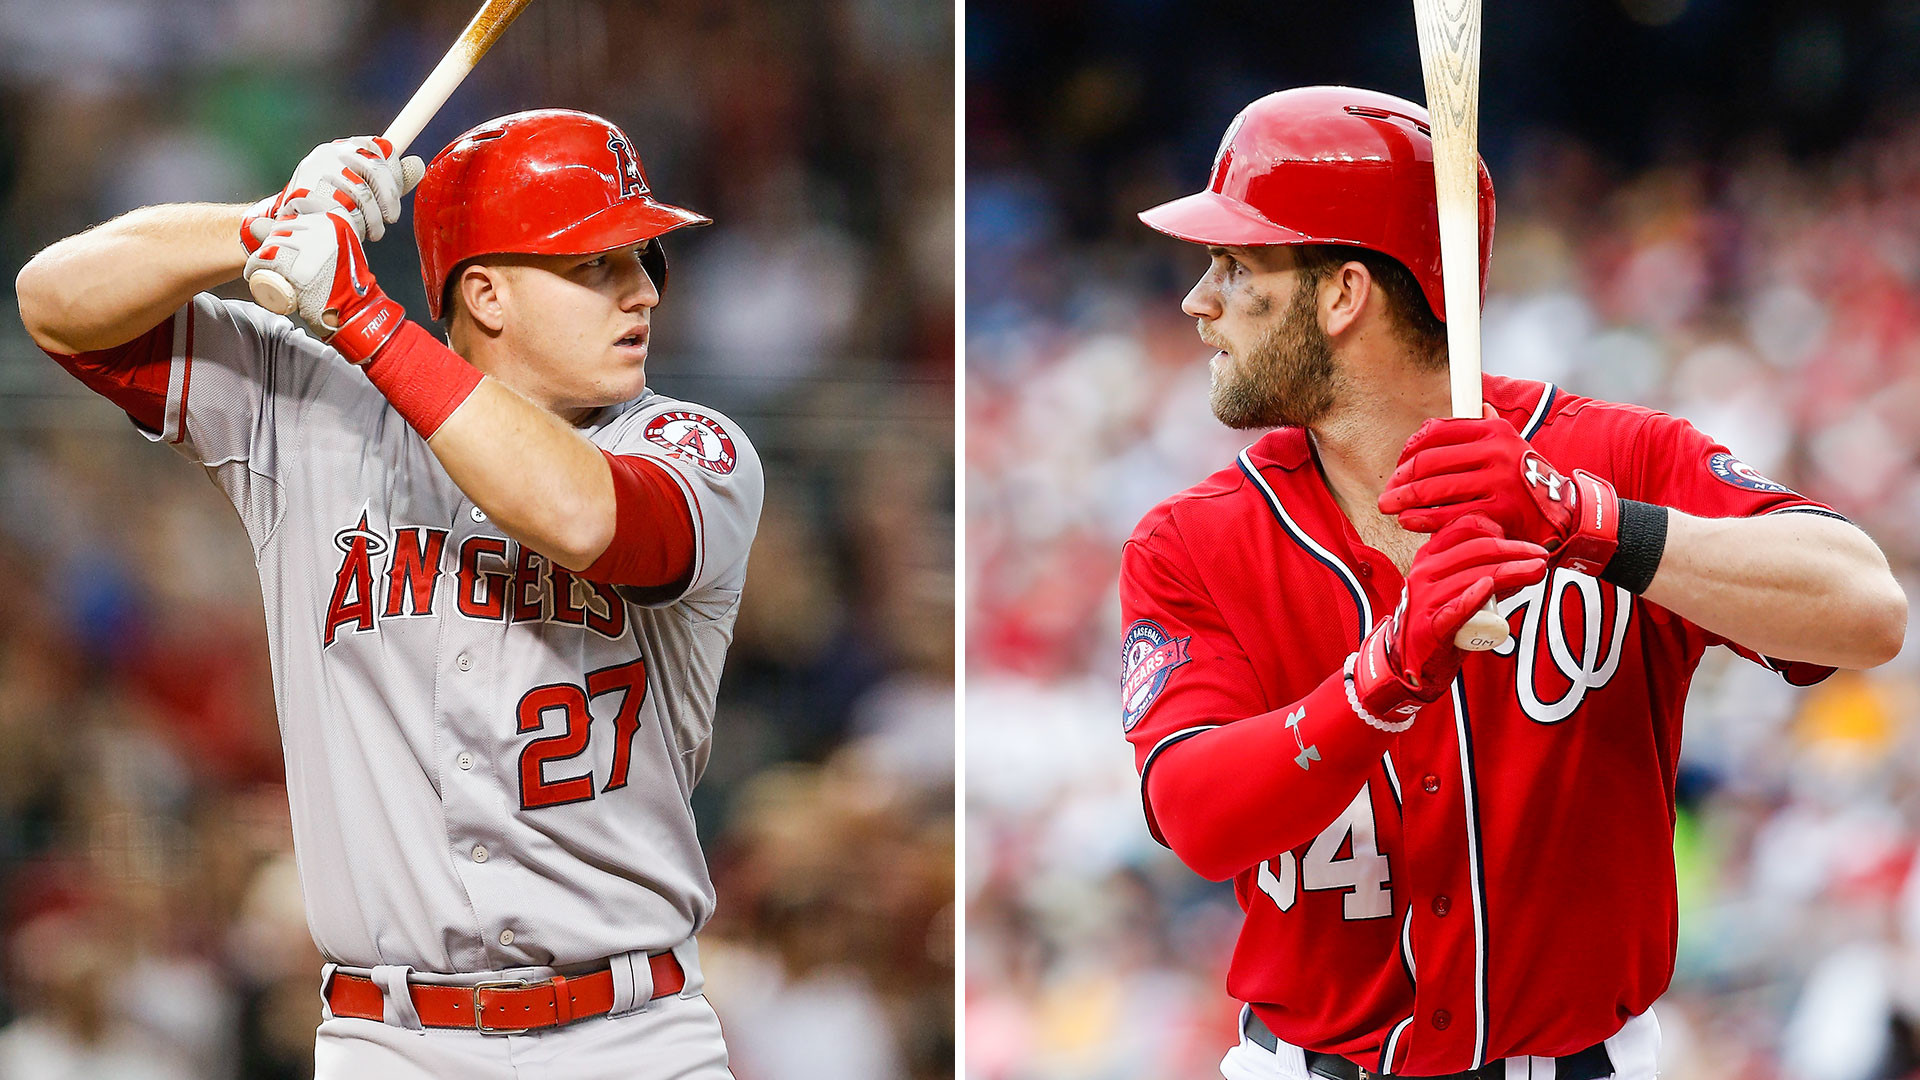 2016 Fantasy Baseball Rankings, OF Mike Trout, Bryce Harper battle for top spot Fantasy Sporting News